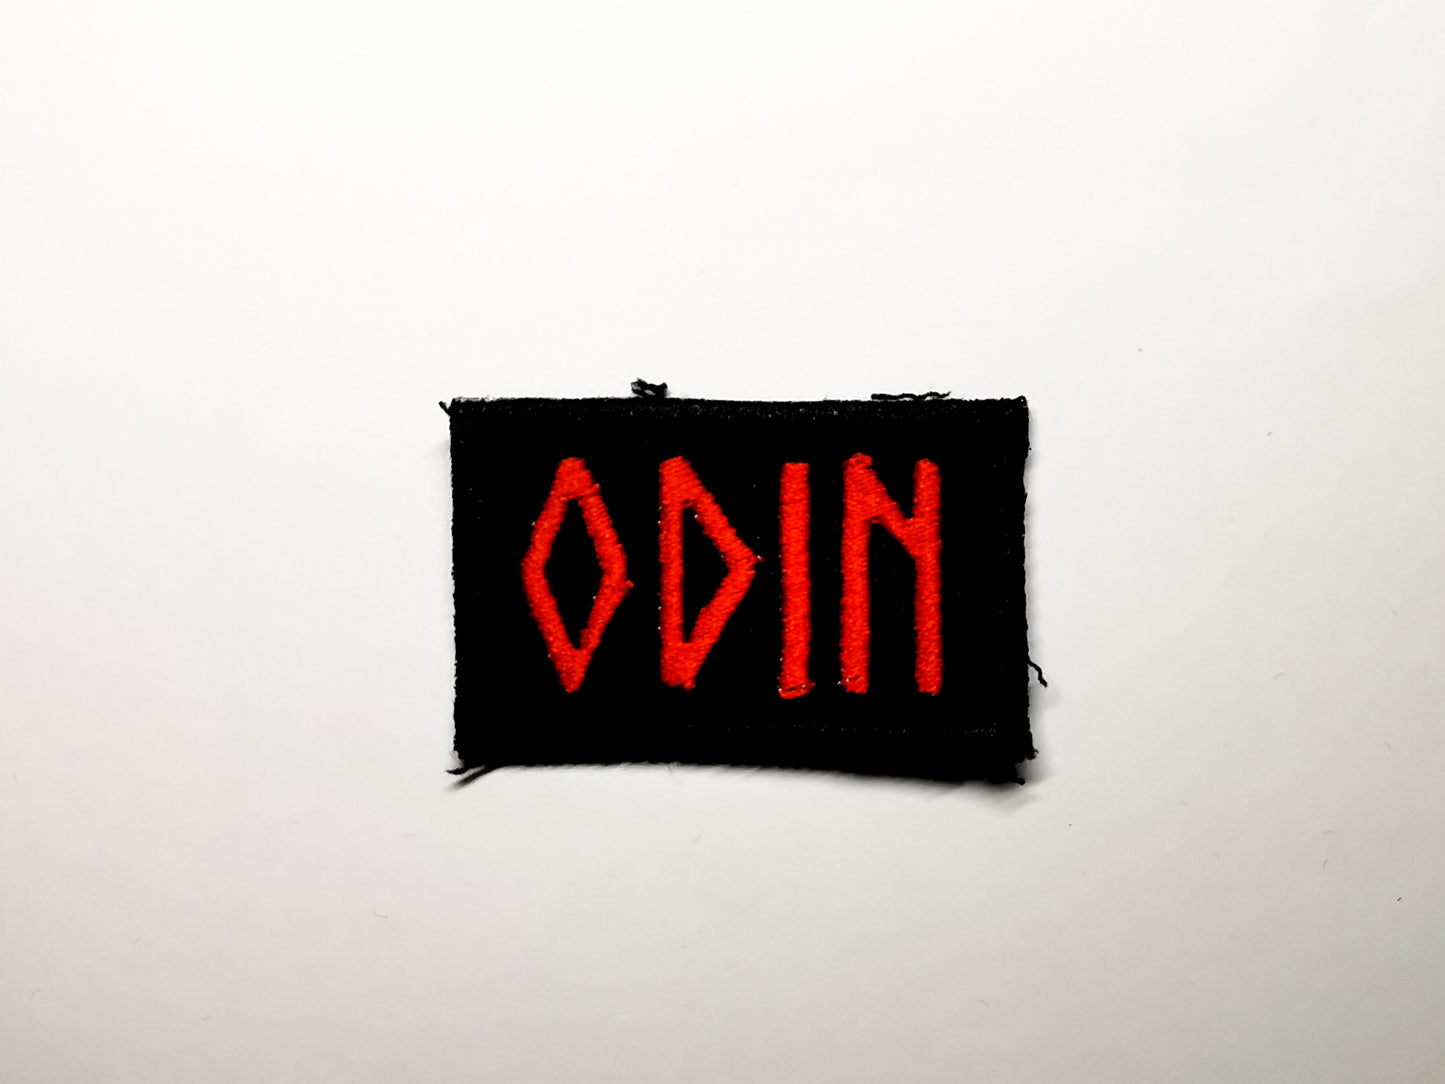 Odin Vikings Rune Red Embroidered Patch Vikings Gift